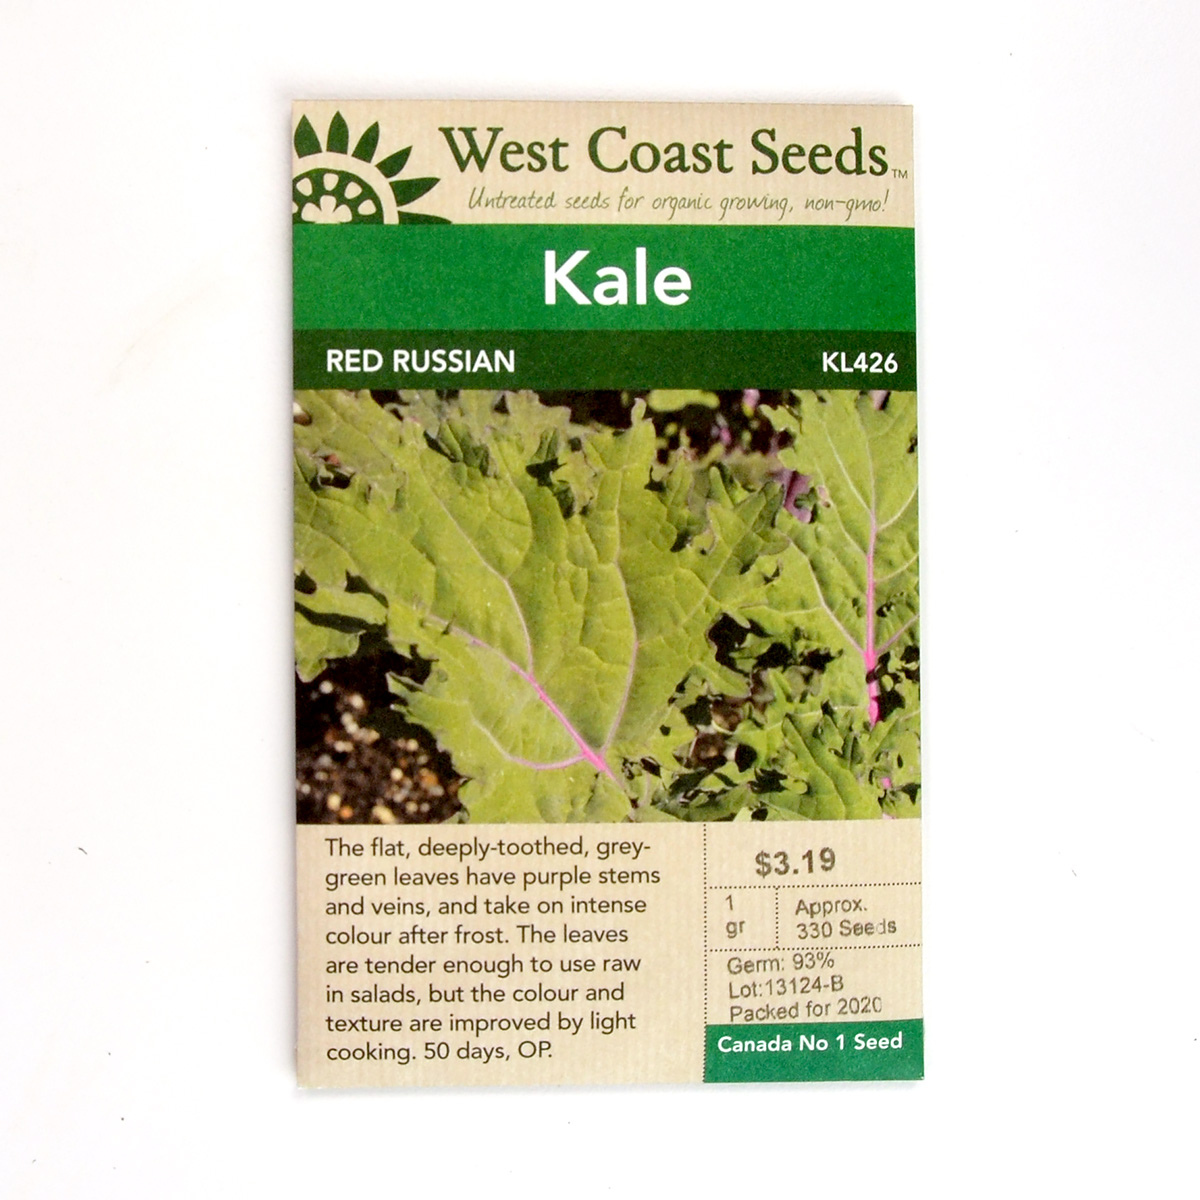 Kale Red Russian Seeds KL426